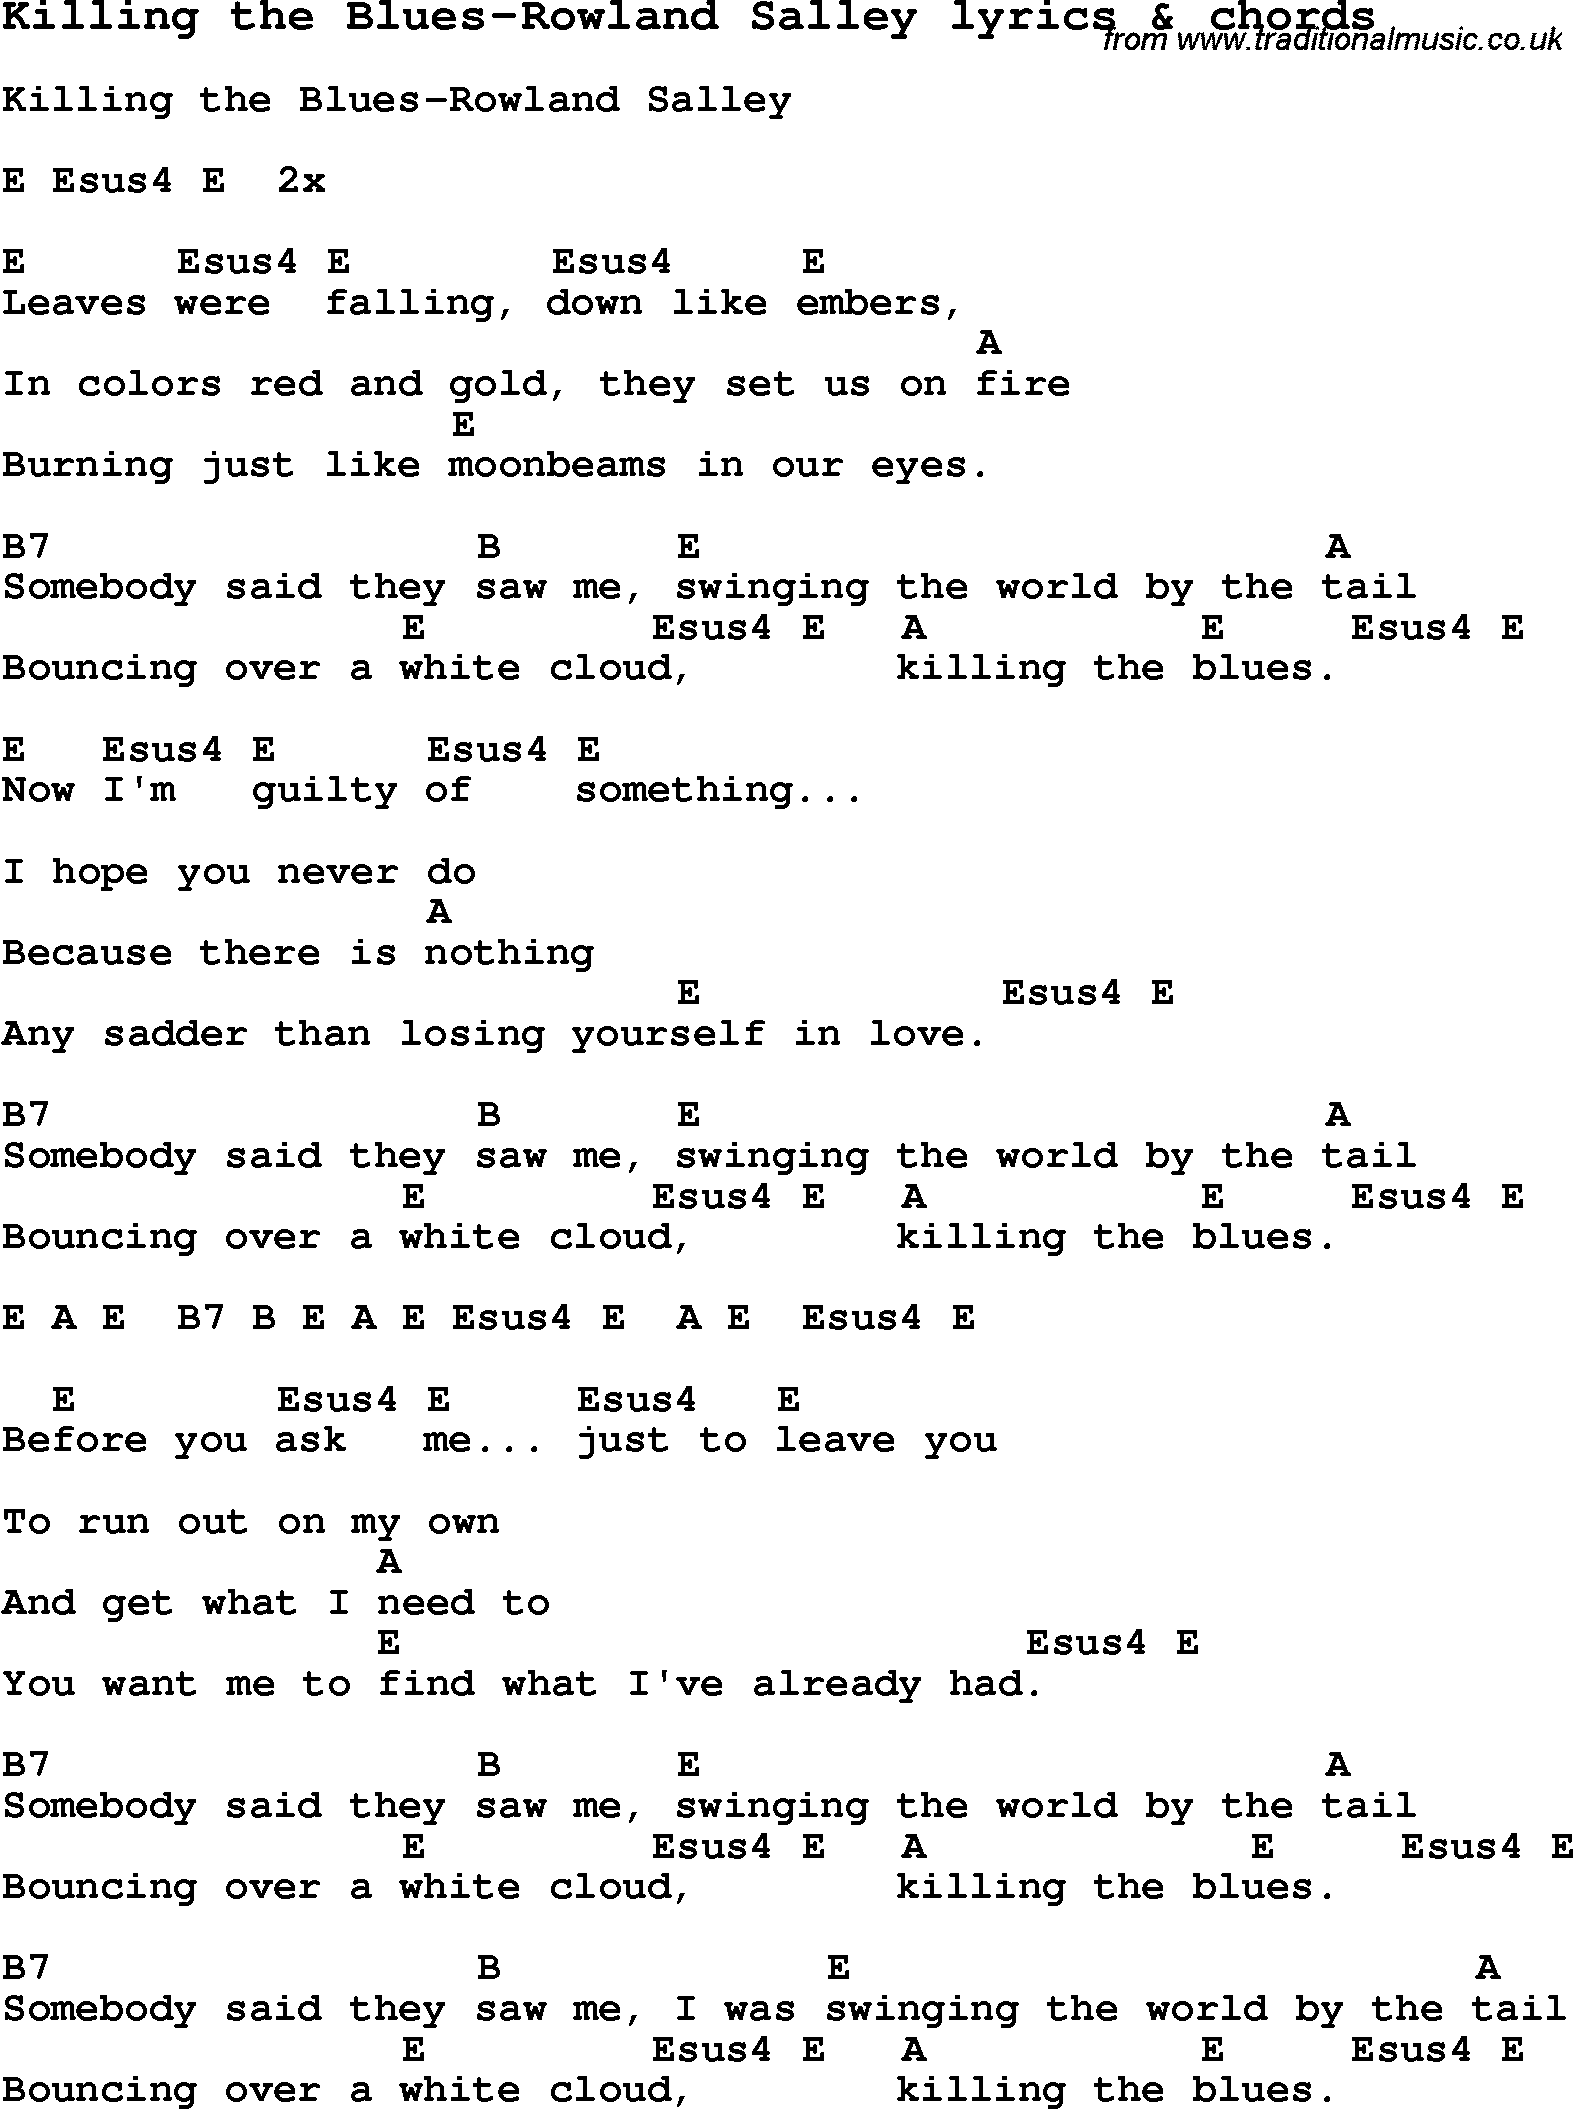 Love Song Lyrics for: Killing the Blues-Rowland Salley with chords for Ukulele, Guitar Banjo etc.